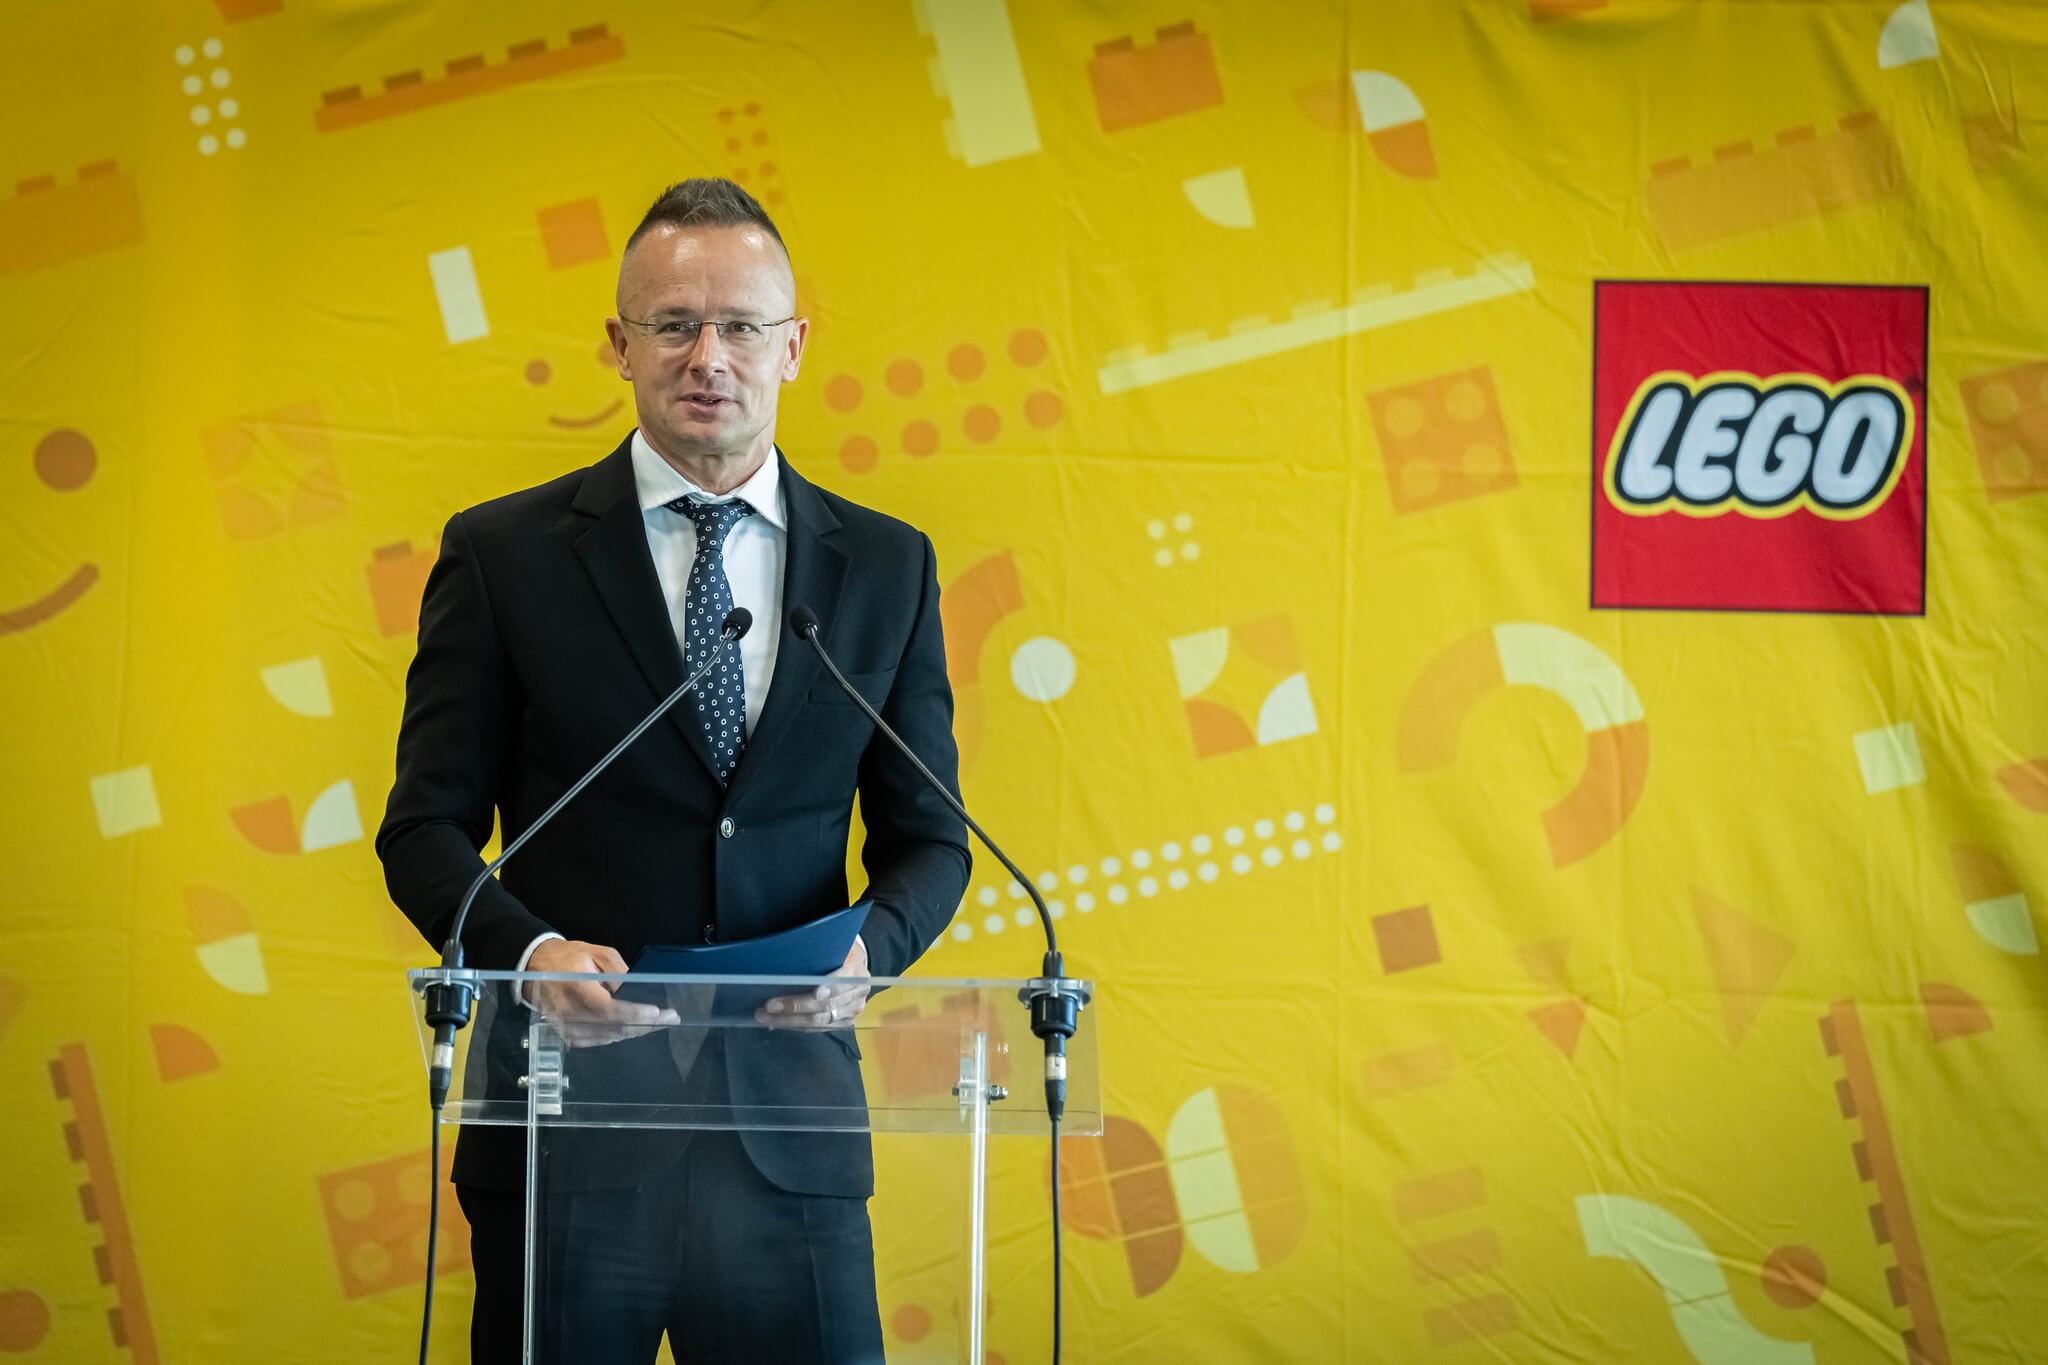 Big Build: Lego to Invest HUF 54 Billion at Base in Hungary